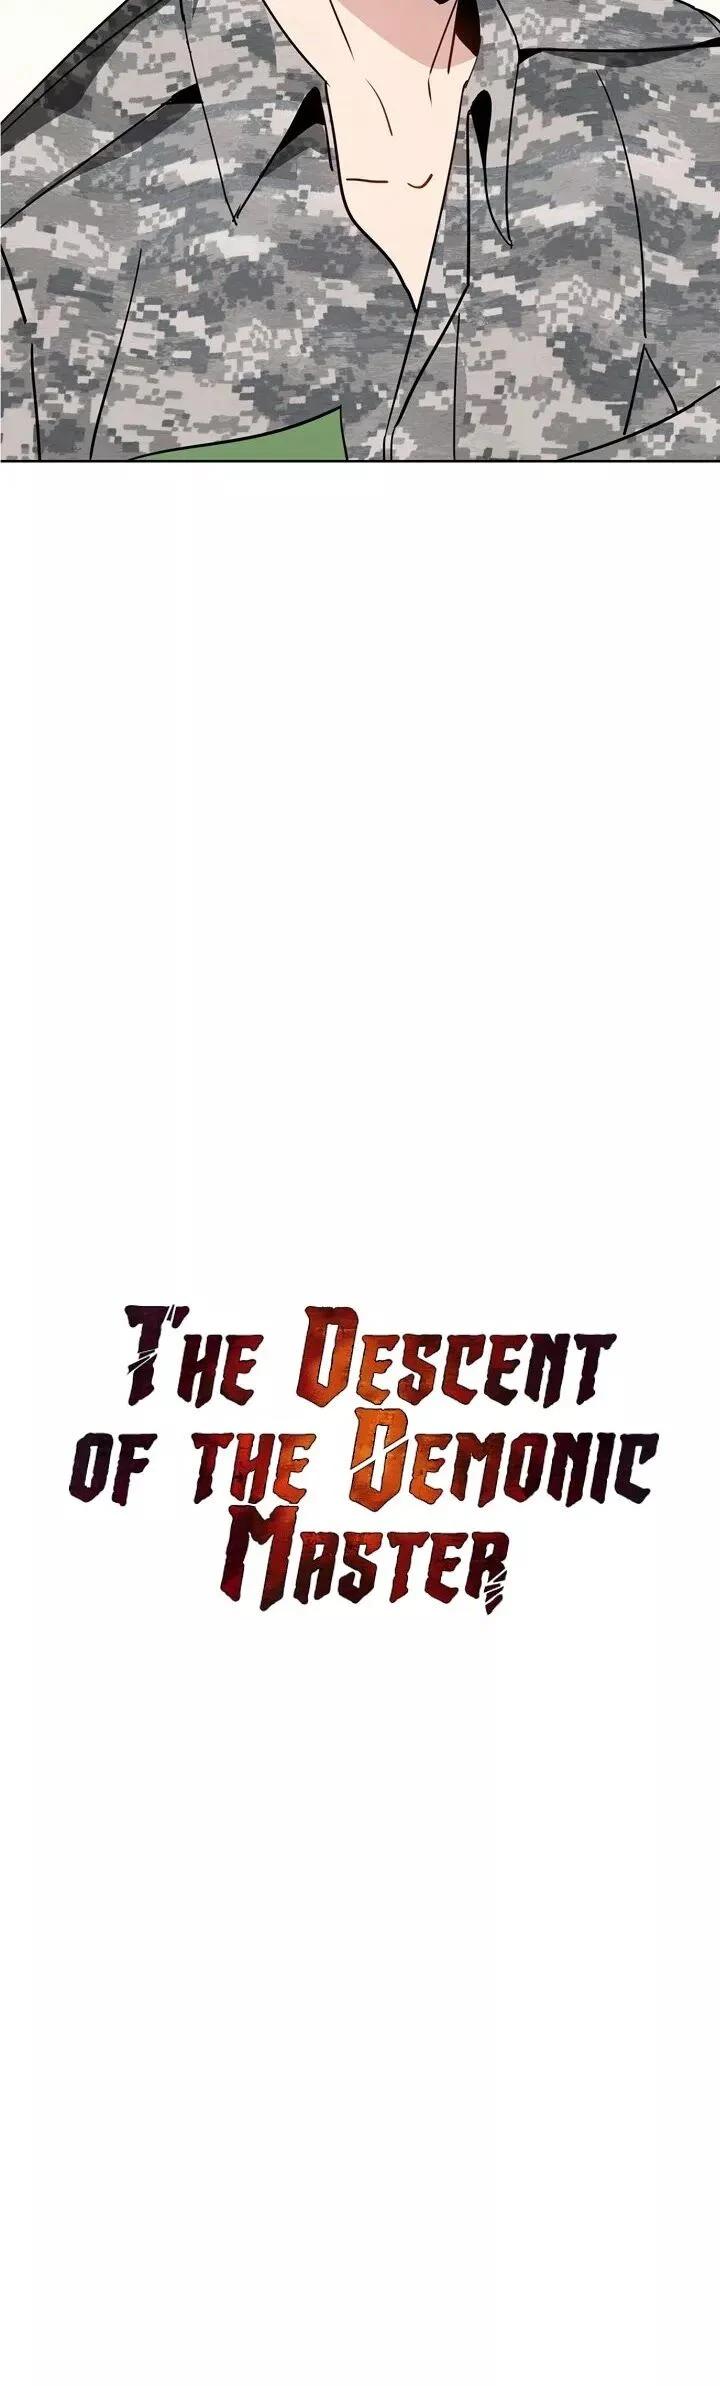 The Descent Of The Demonic Master 47 6